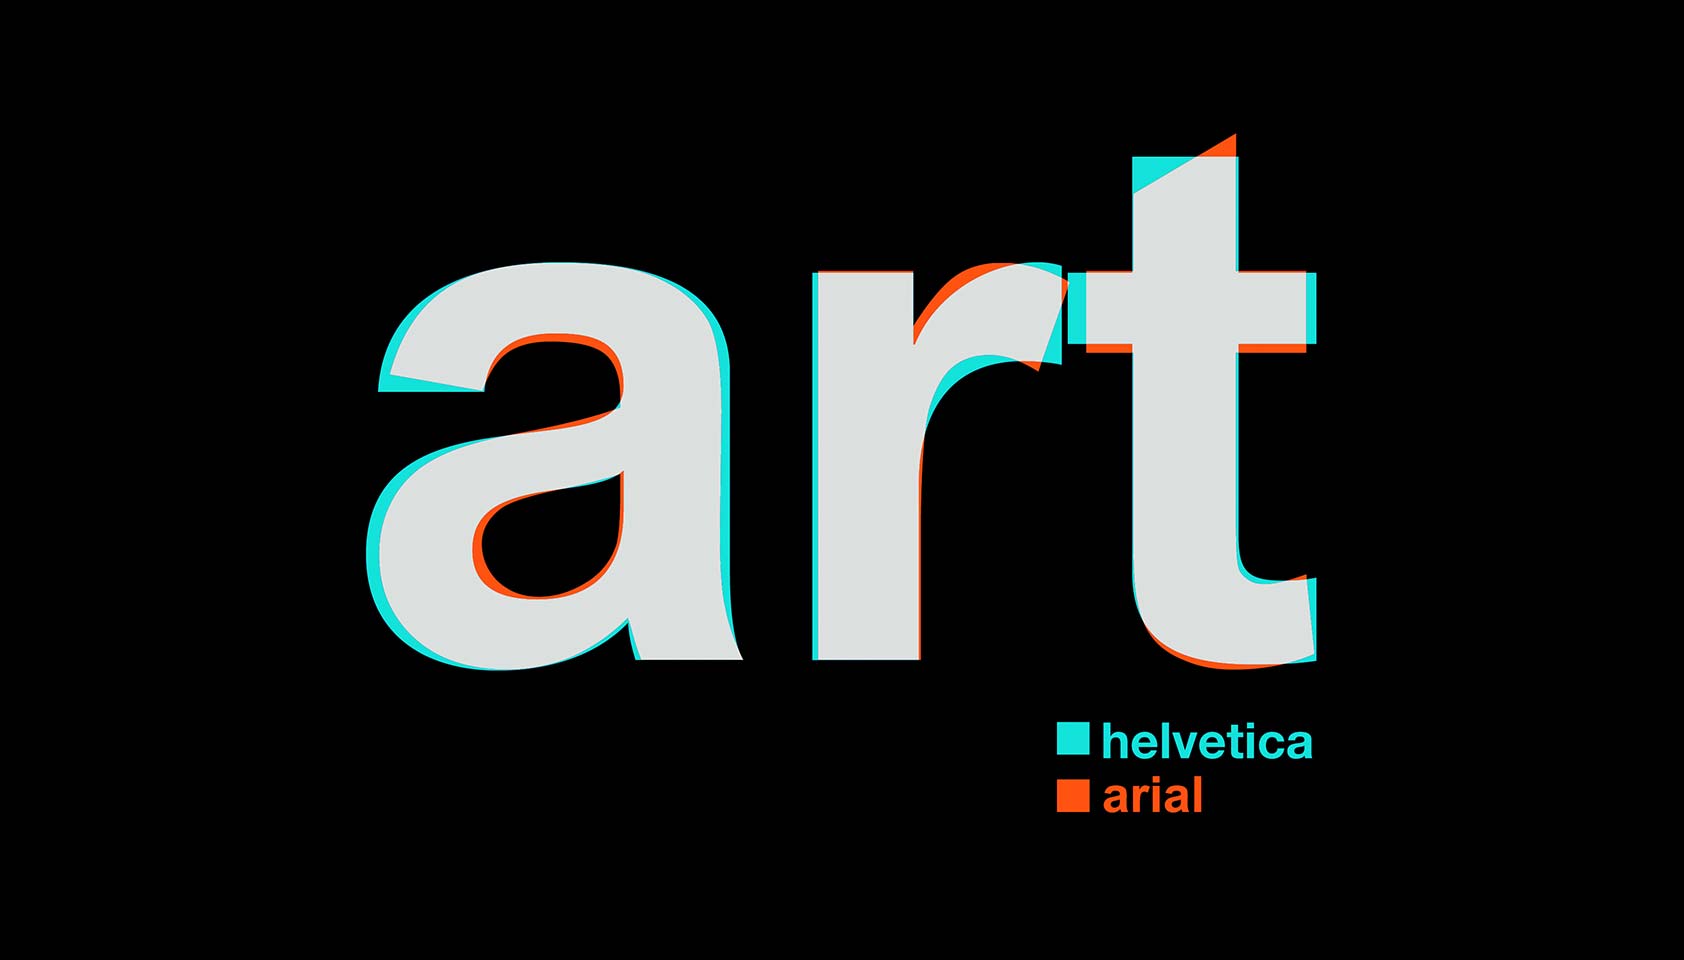 difference between helvetica now and neue